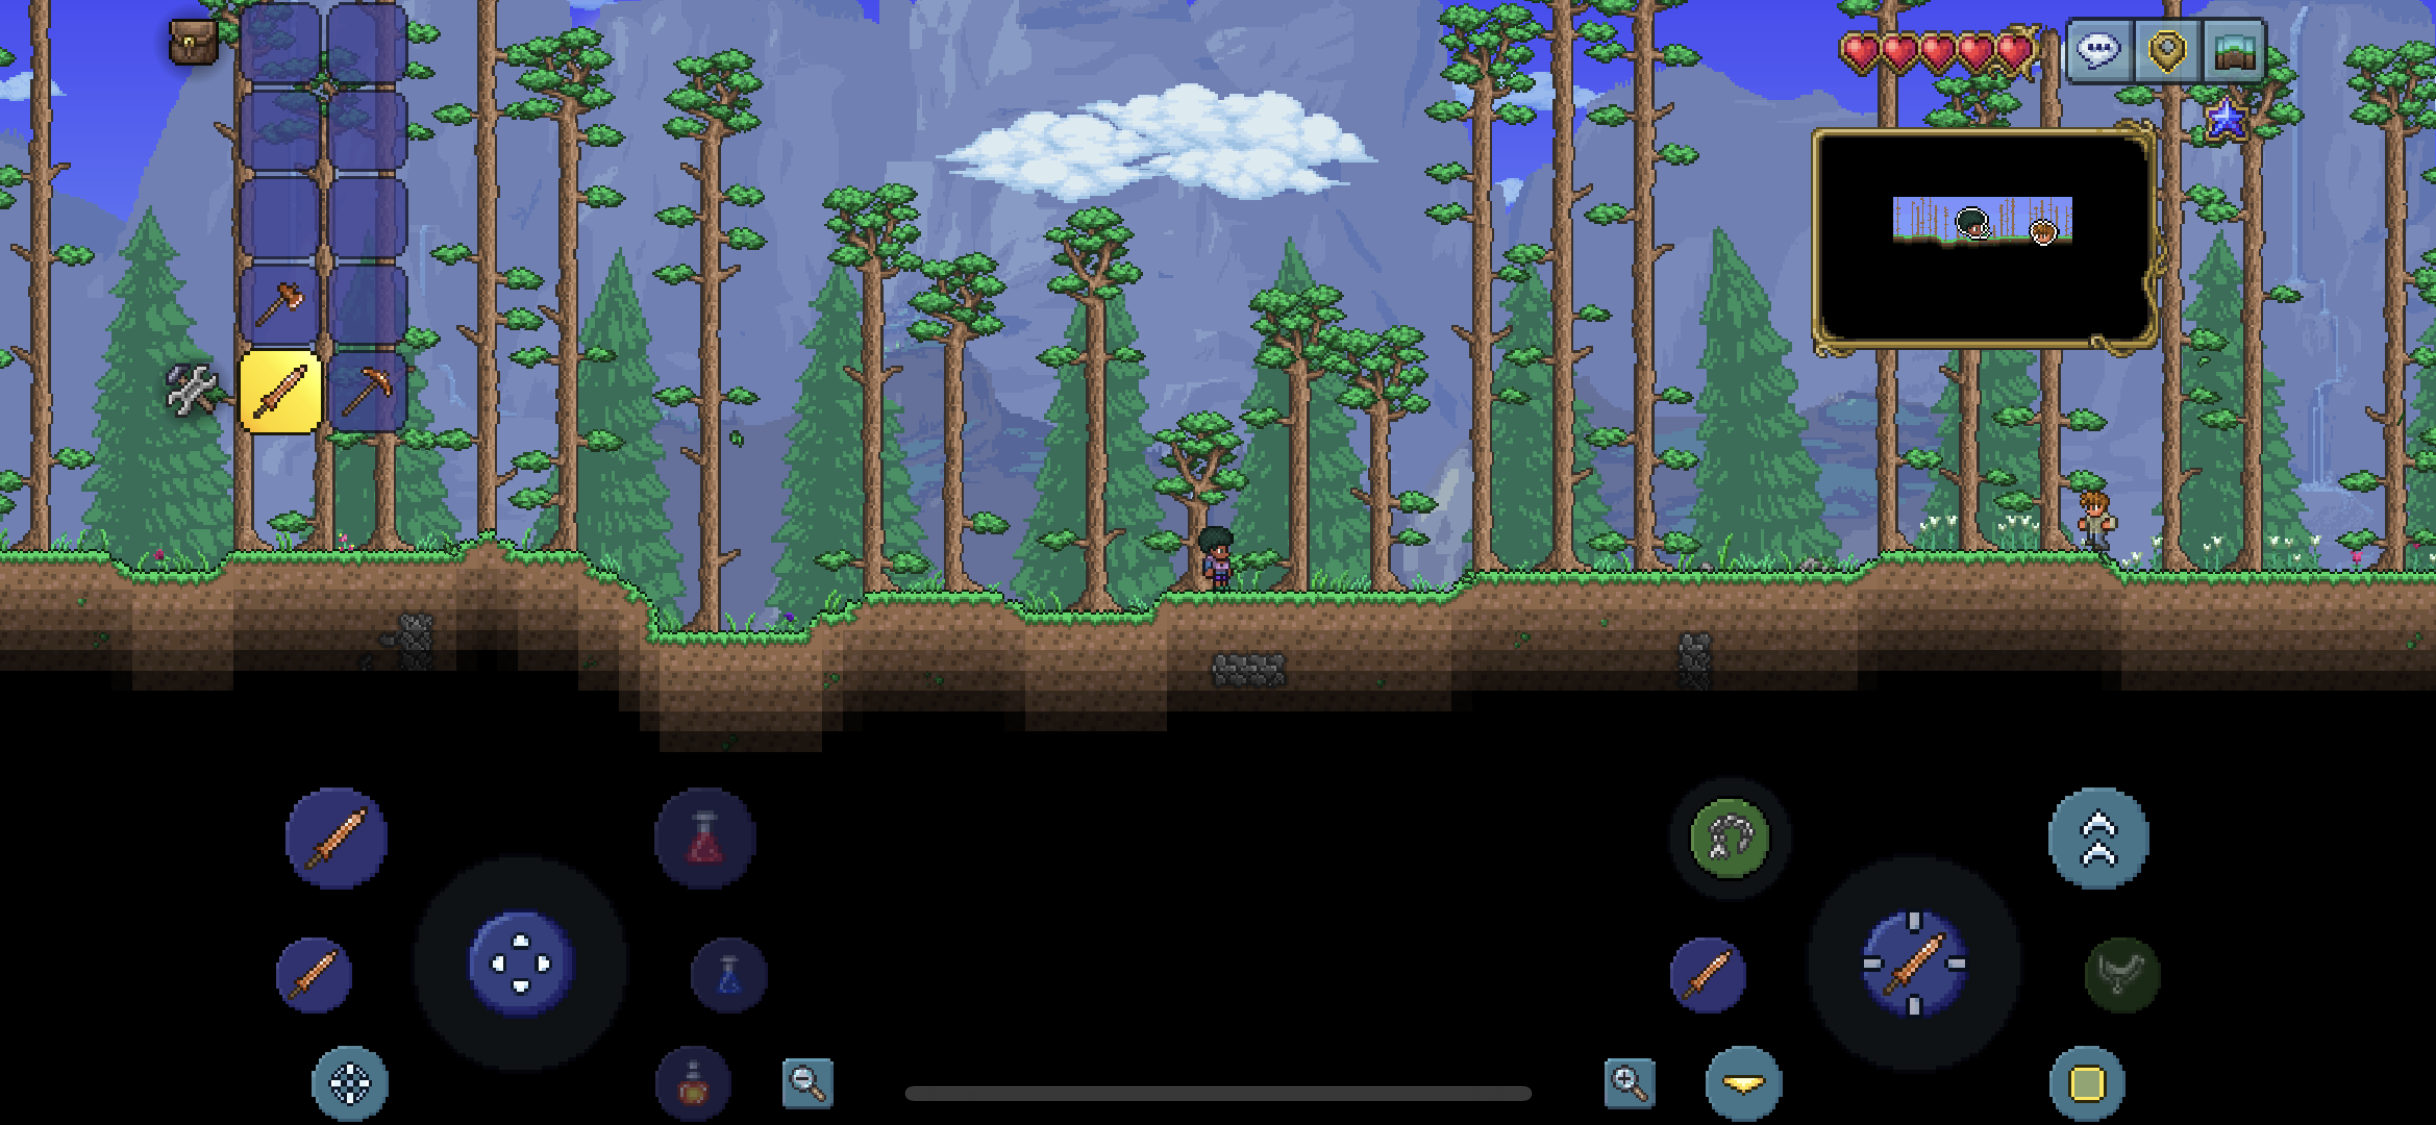 How to Setup Terraria Crossplay for PC and Mobile Edition - Knowledgebase -  Shockbyte